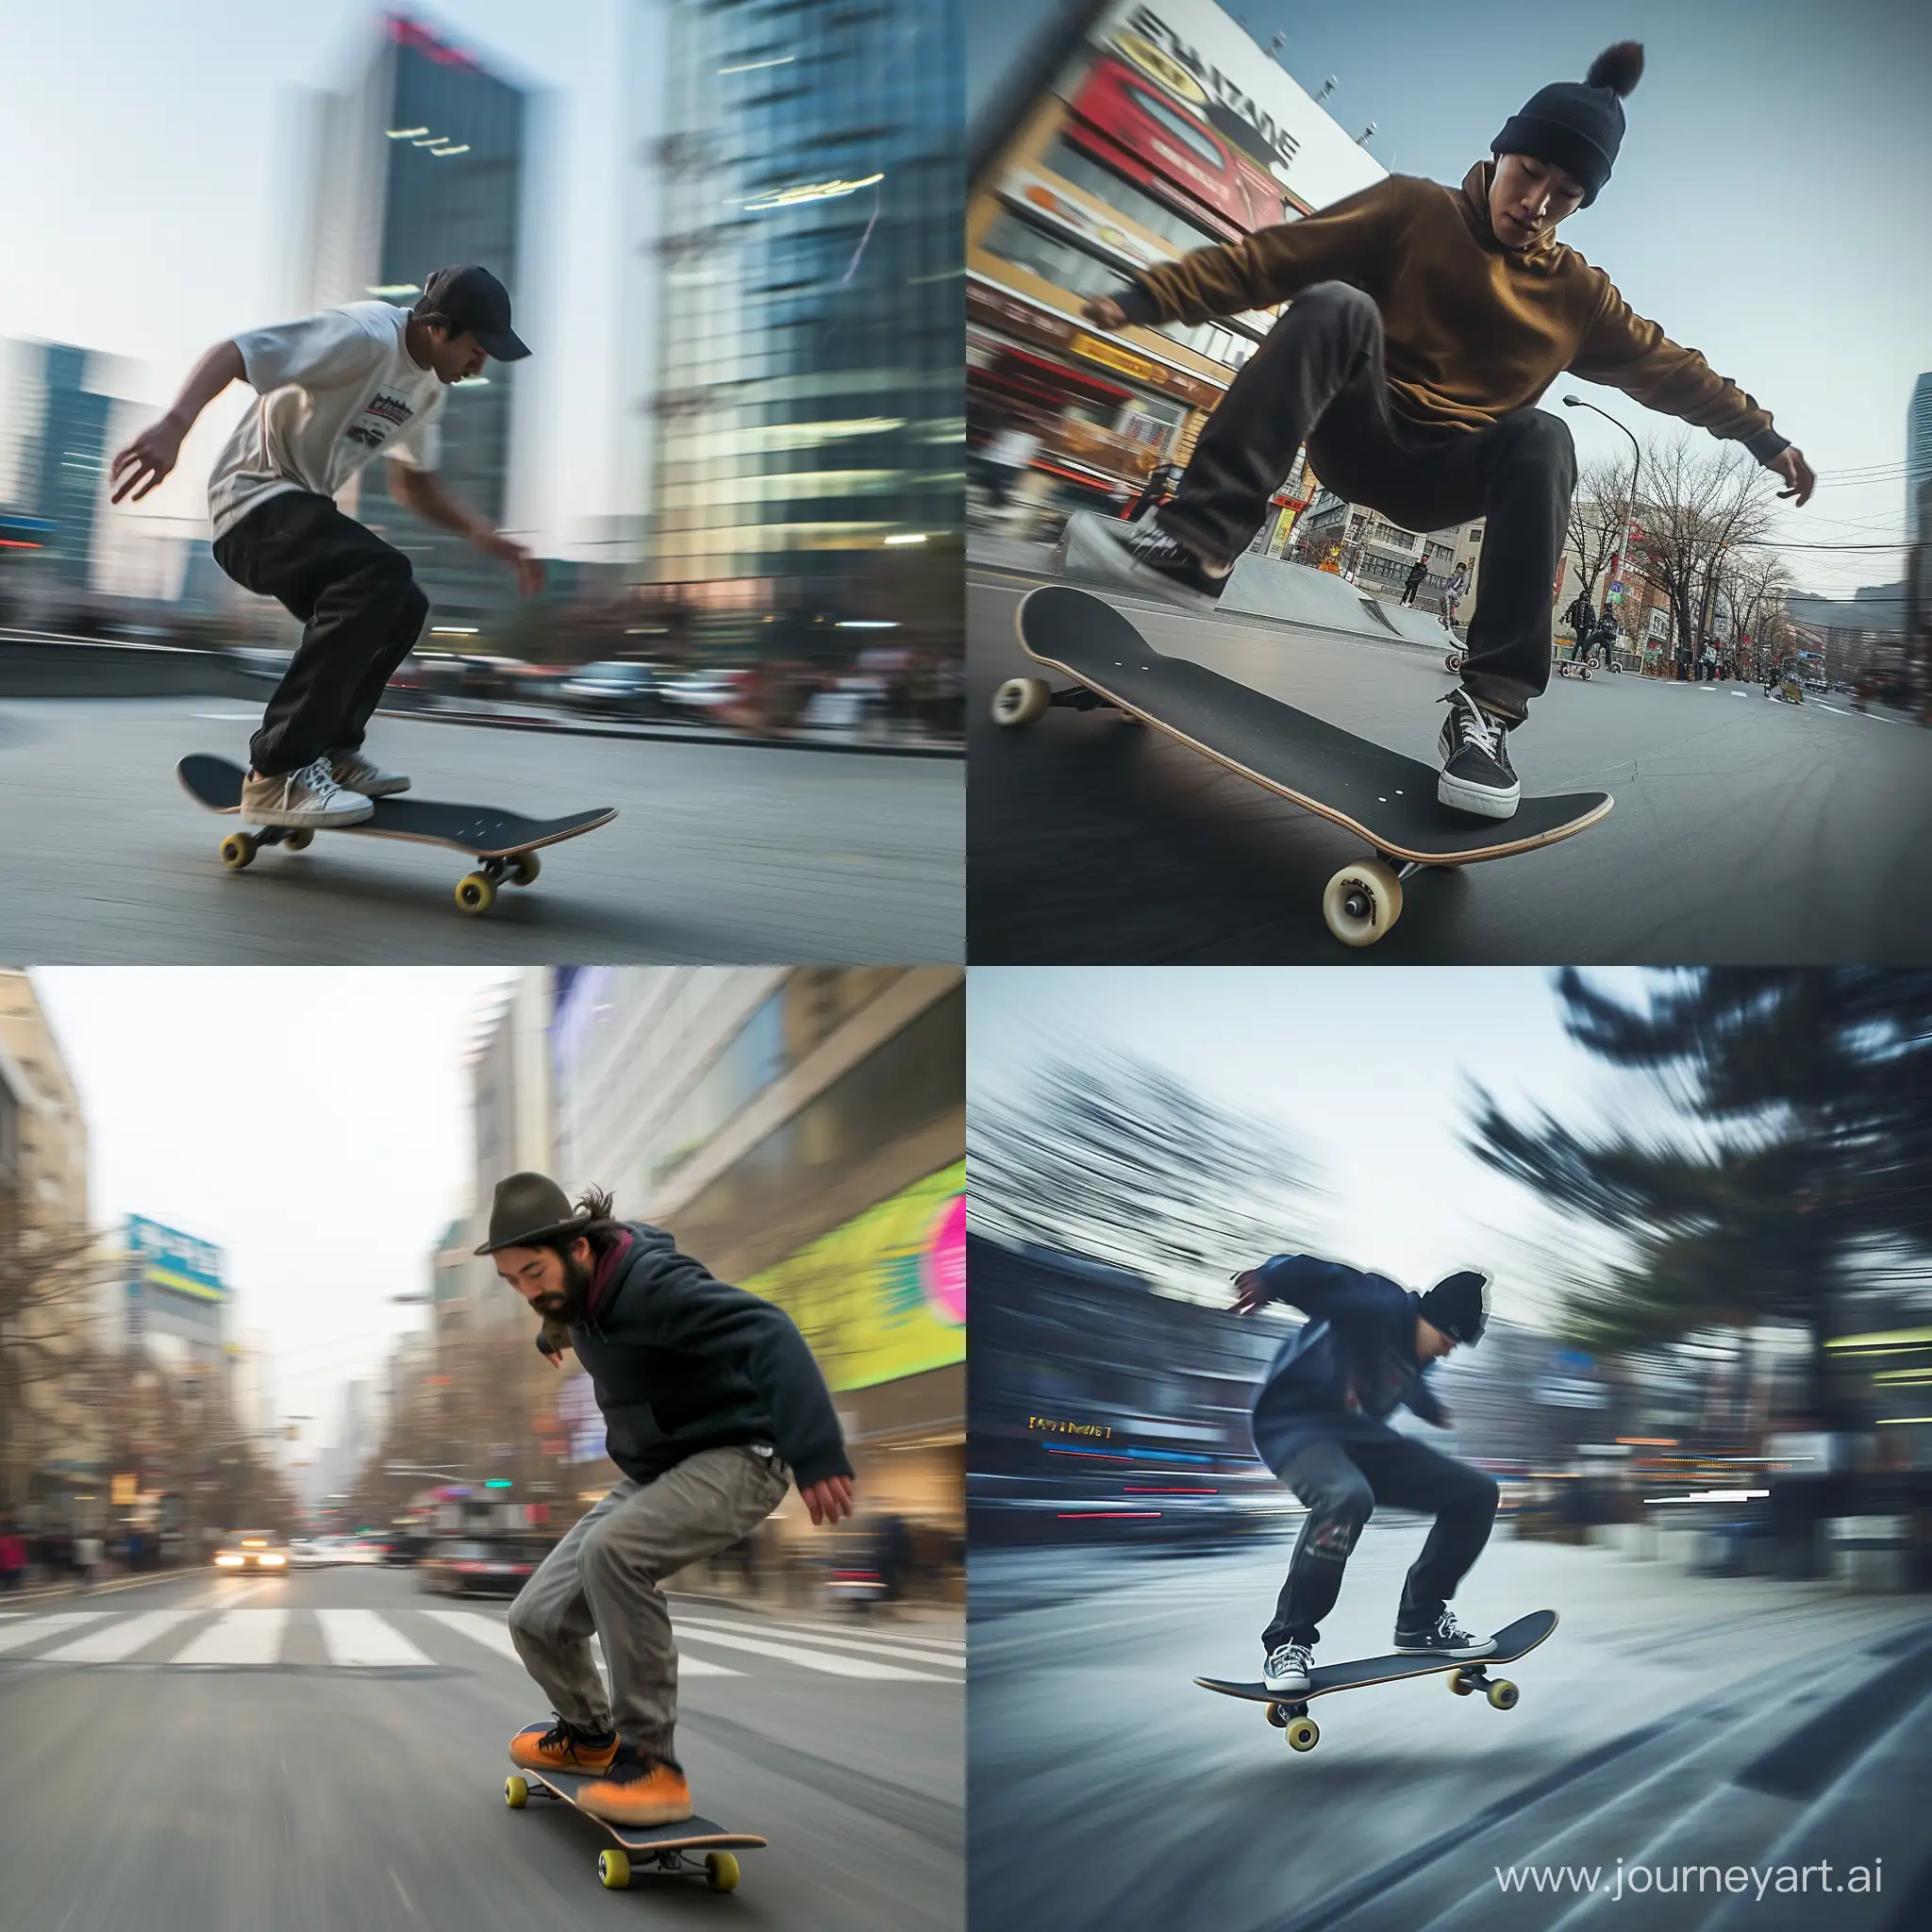 photography, distance range, in the Seoul city, extreme motion with professional man skate boarder